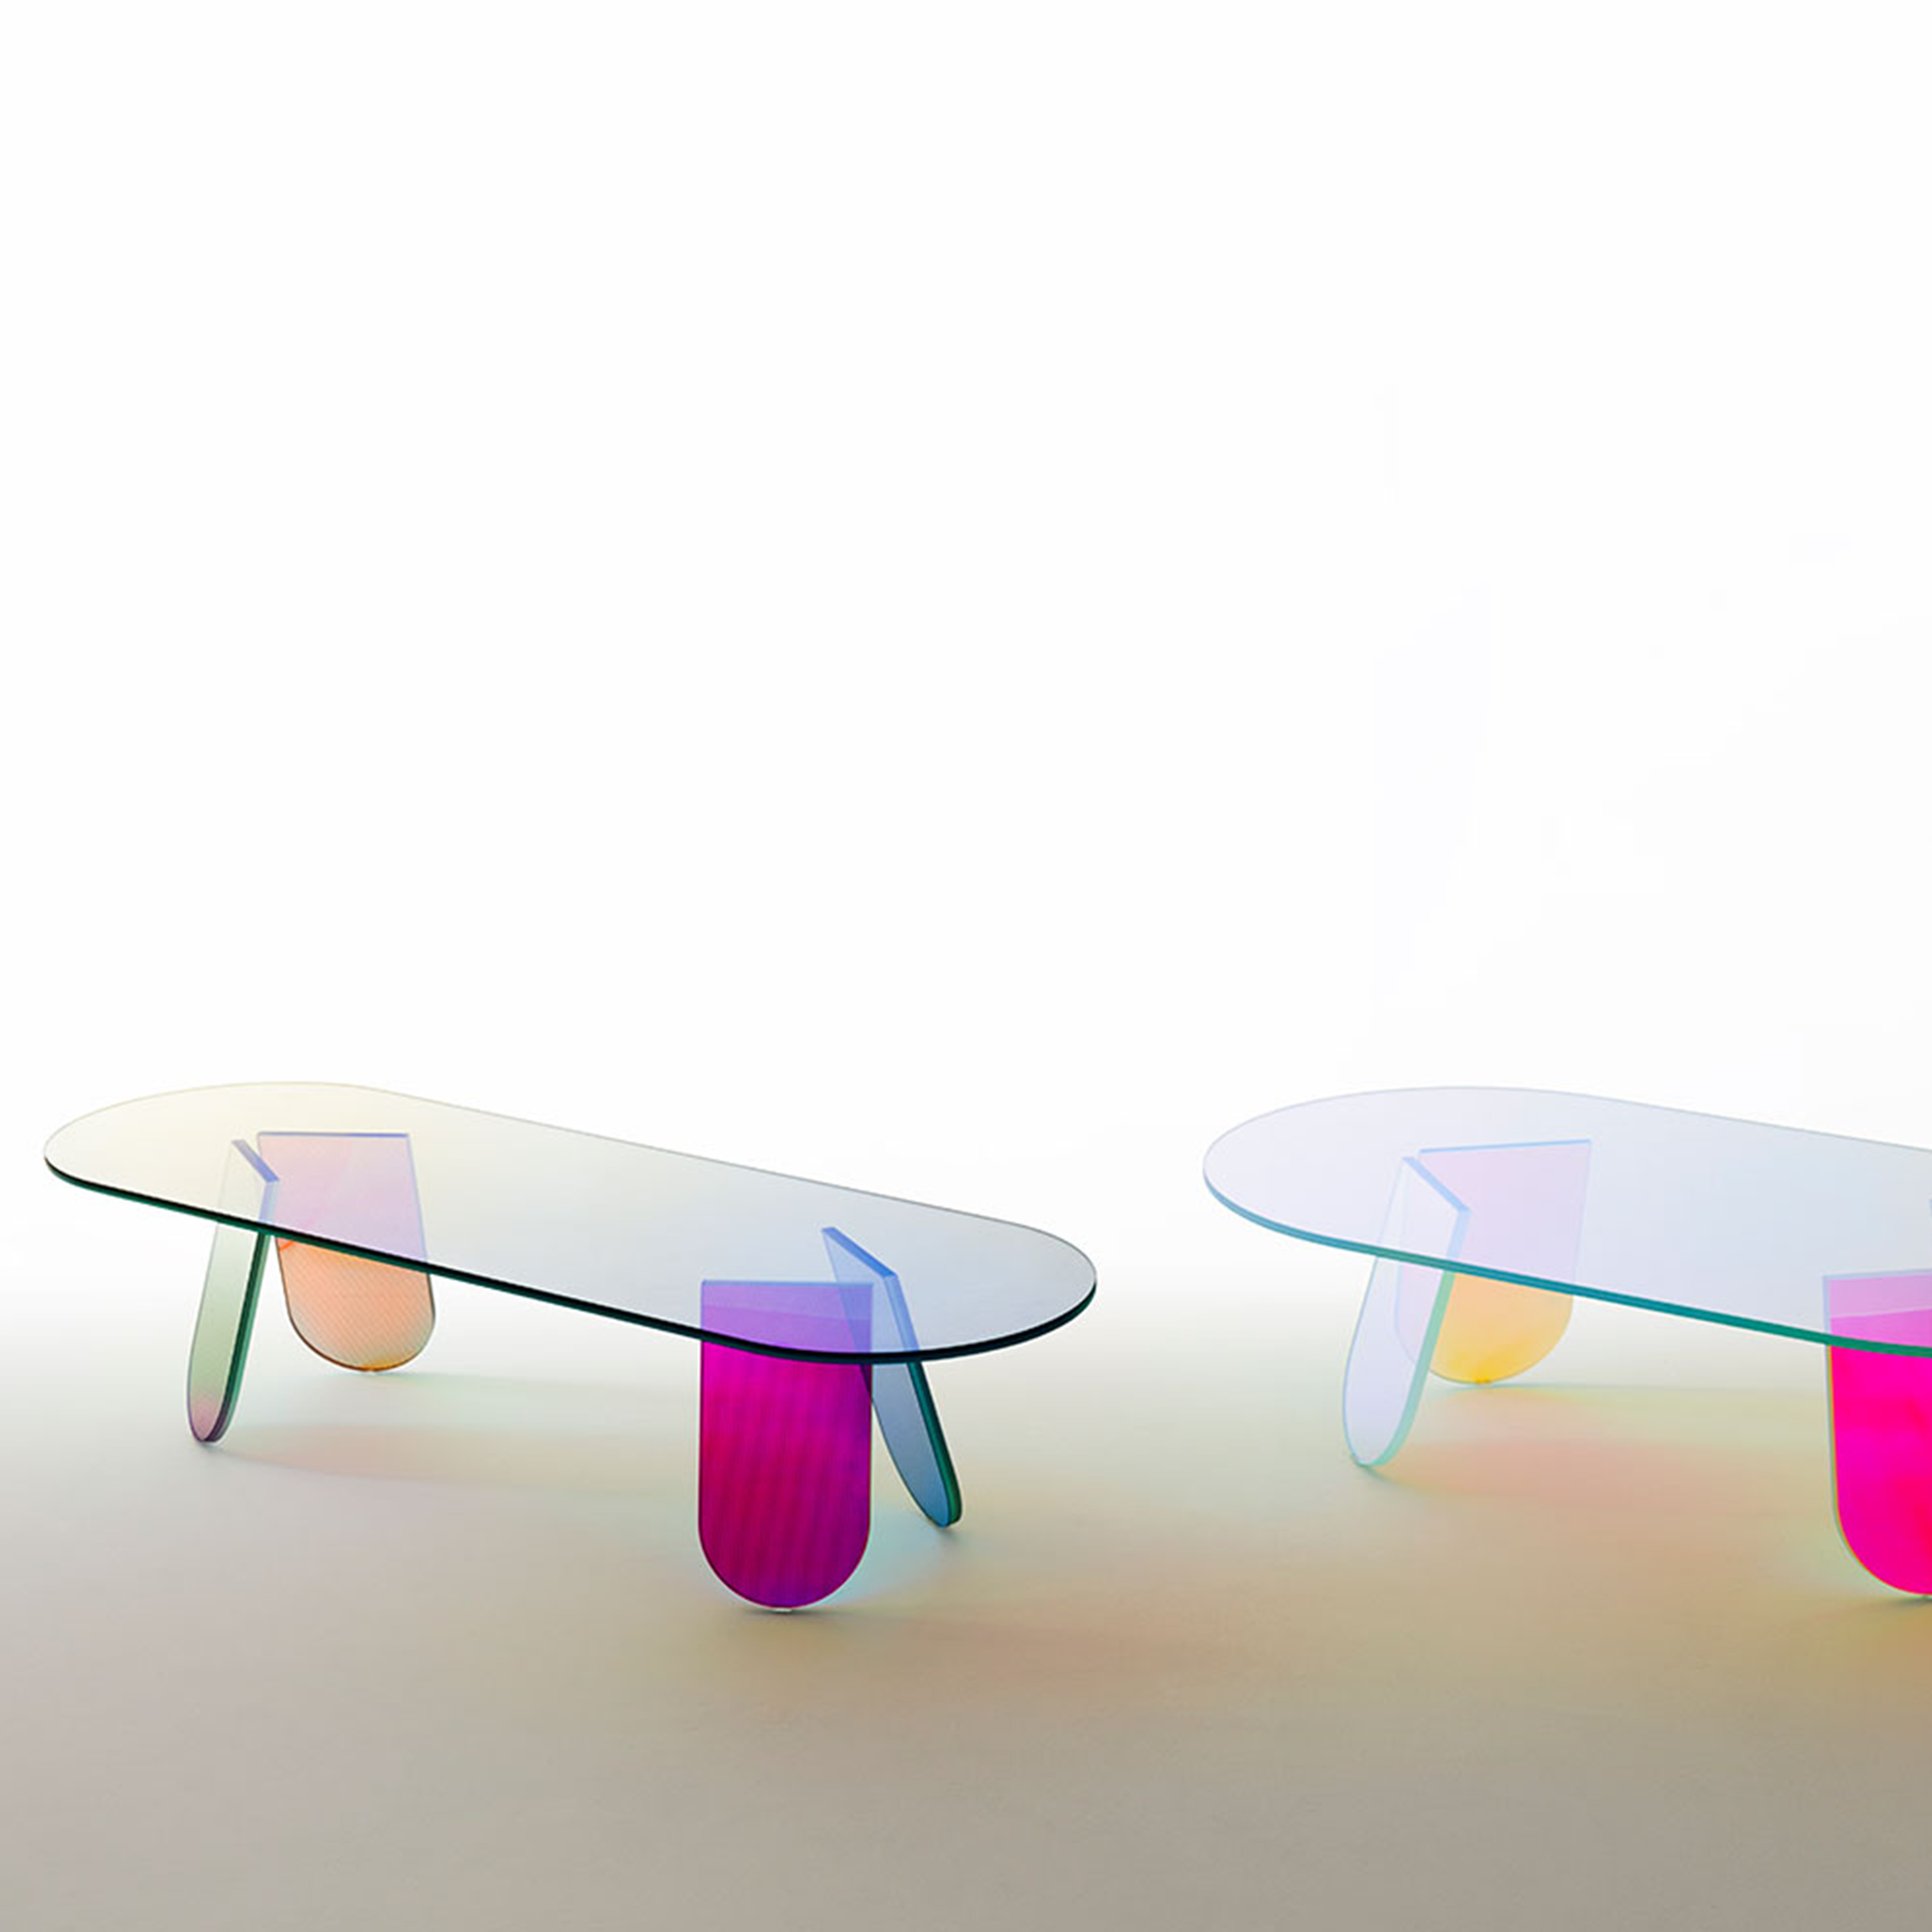 shimmer by patricia urquiola for glas italia.